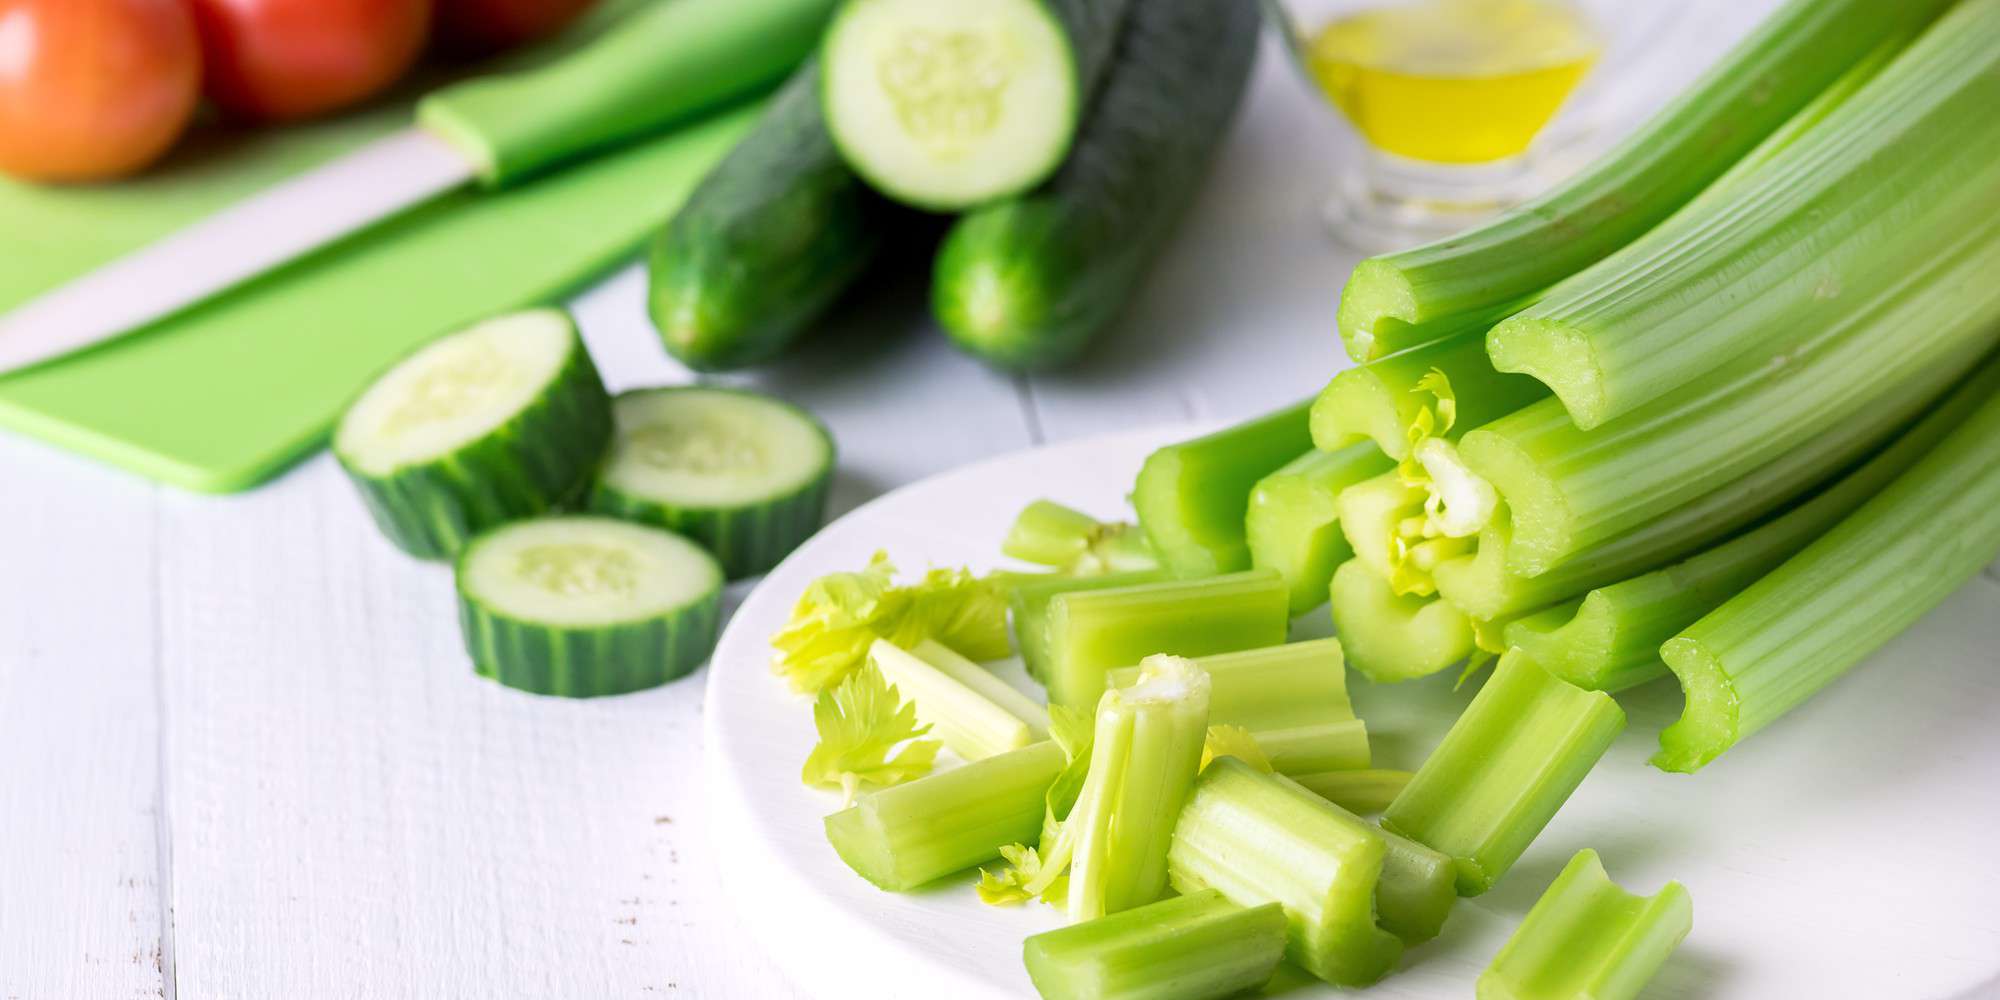 Celery and Cucumber Slices